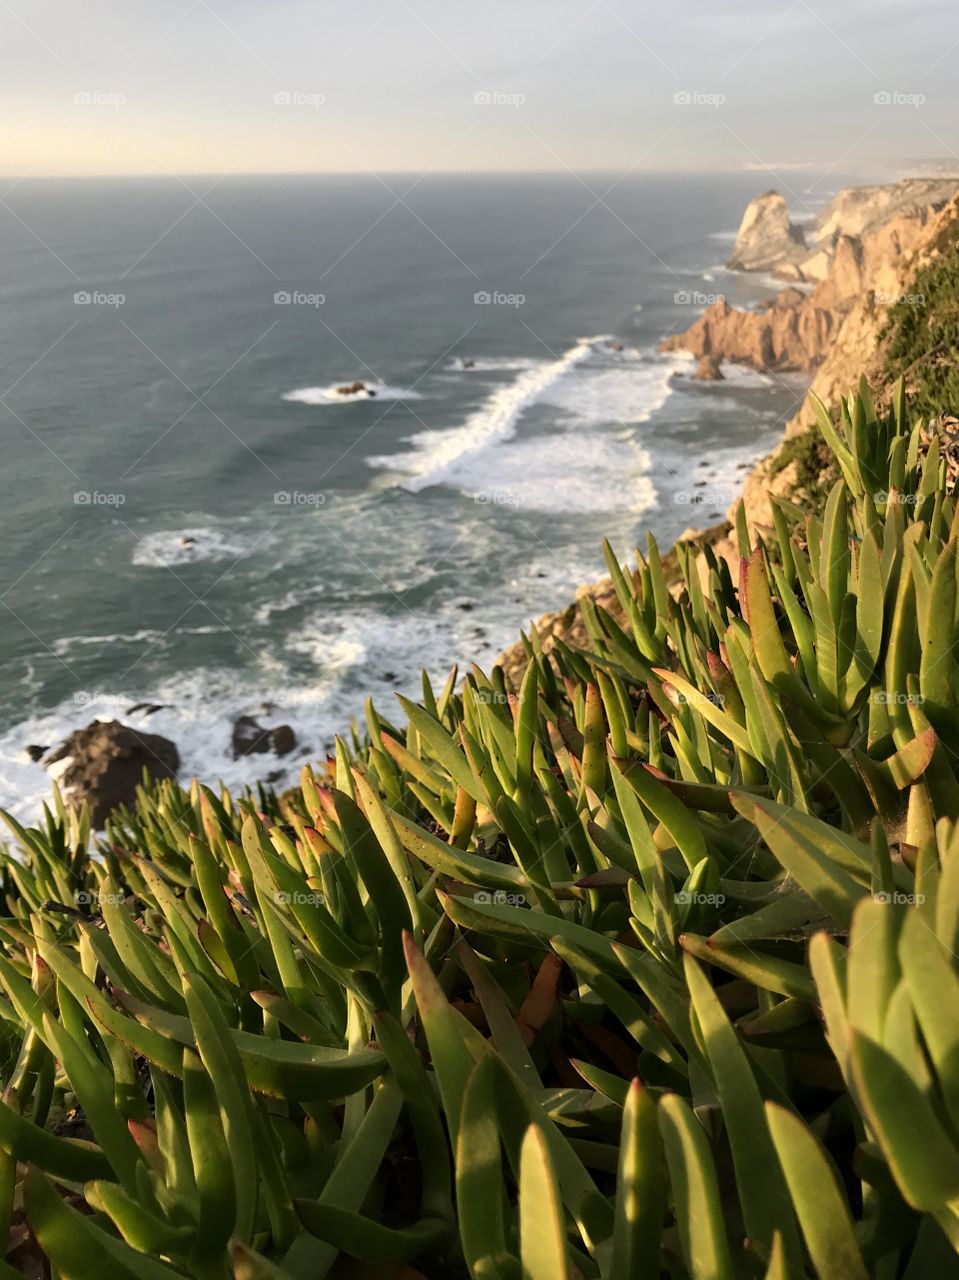 Amazing views on my travel with friends. This is in Portugal. 